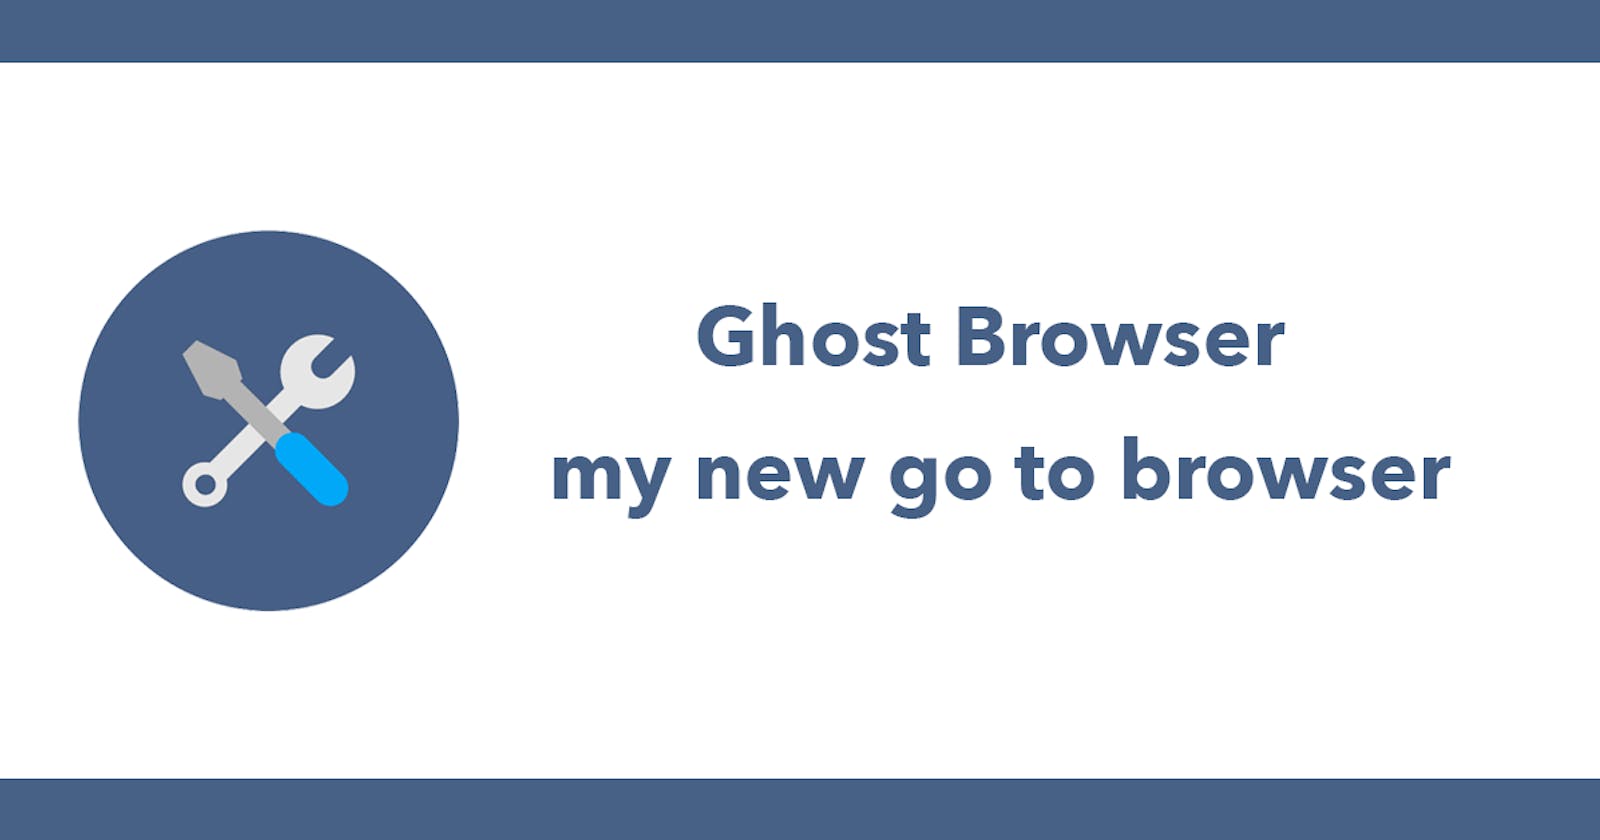 Ghost Browser my new go to browser